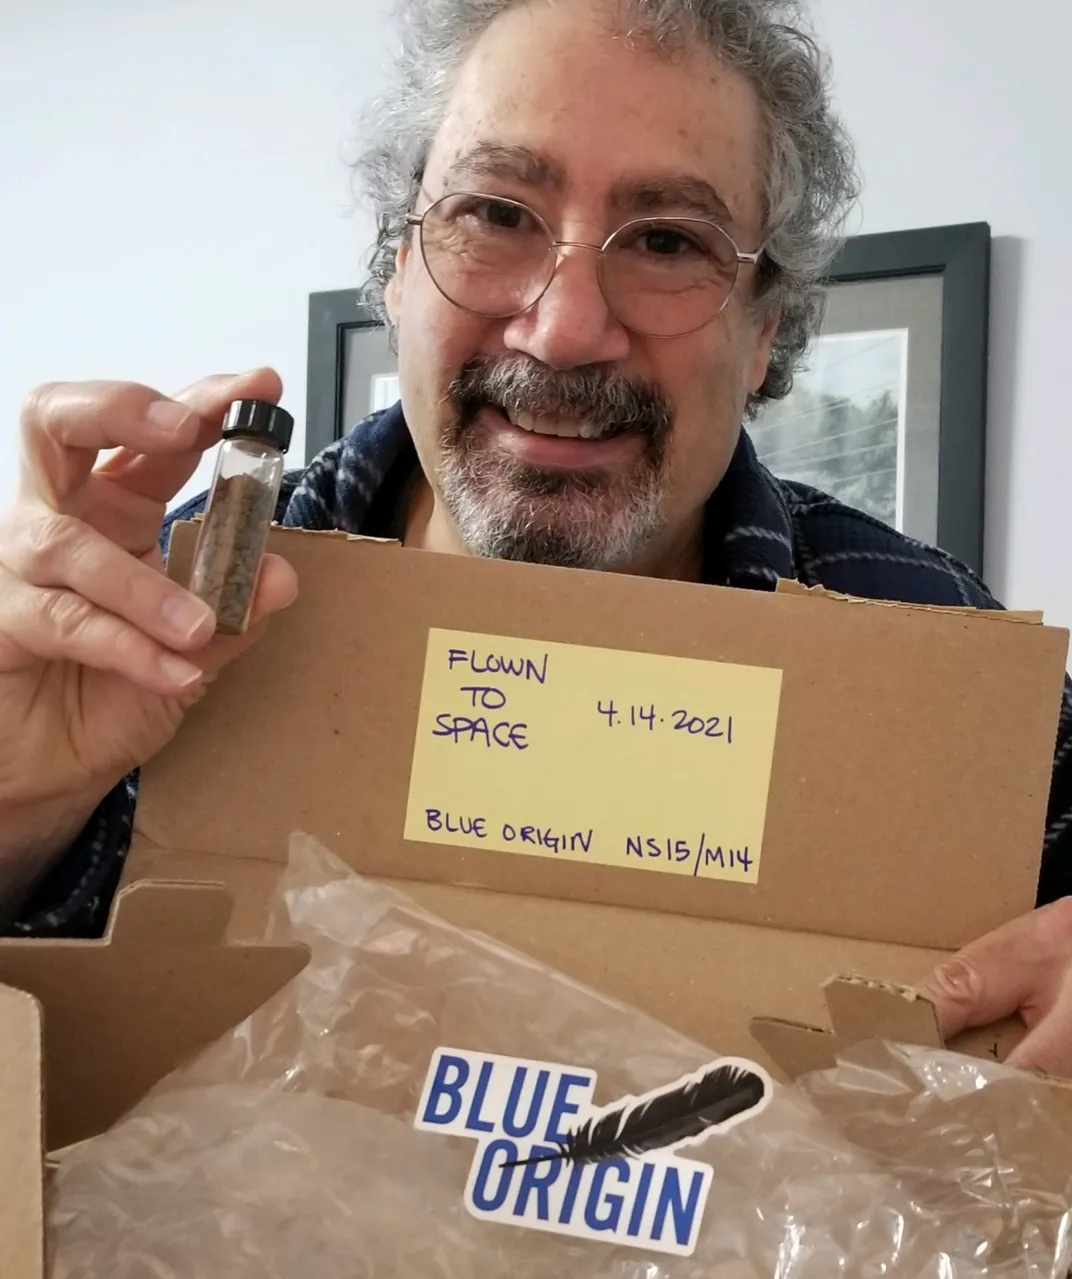 man removes vial of dinosaur bones from box marked "flown to space"